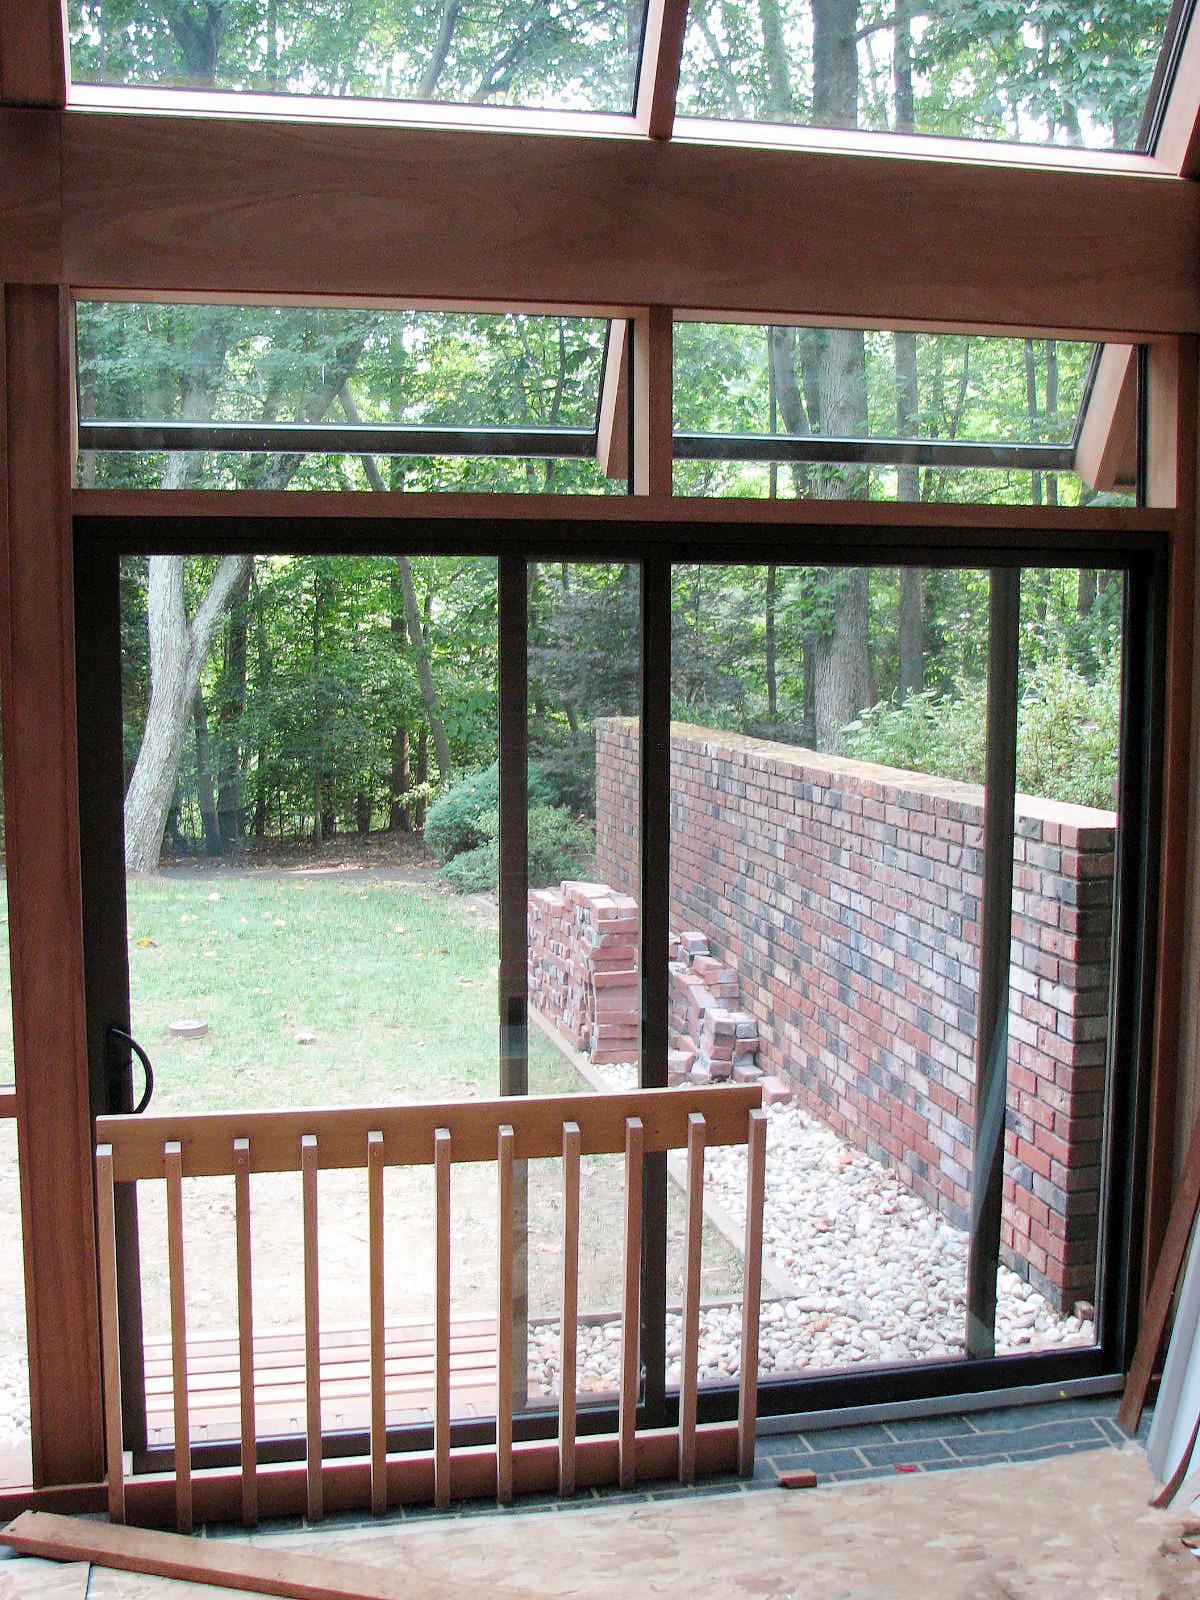 Straight eave lean-to sunroom with no gable ends, retractable exterior screens, mahongany interior, and sliding doors.Straight eave lean-to sunroom with no gable ends, retractable exterior screens, mahongany interior, and sliding doors.